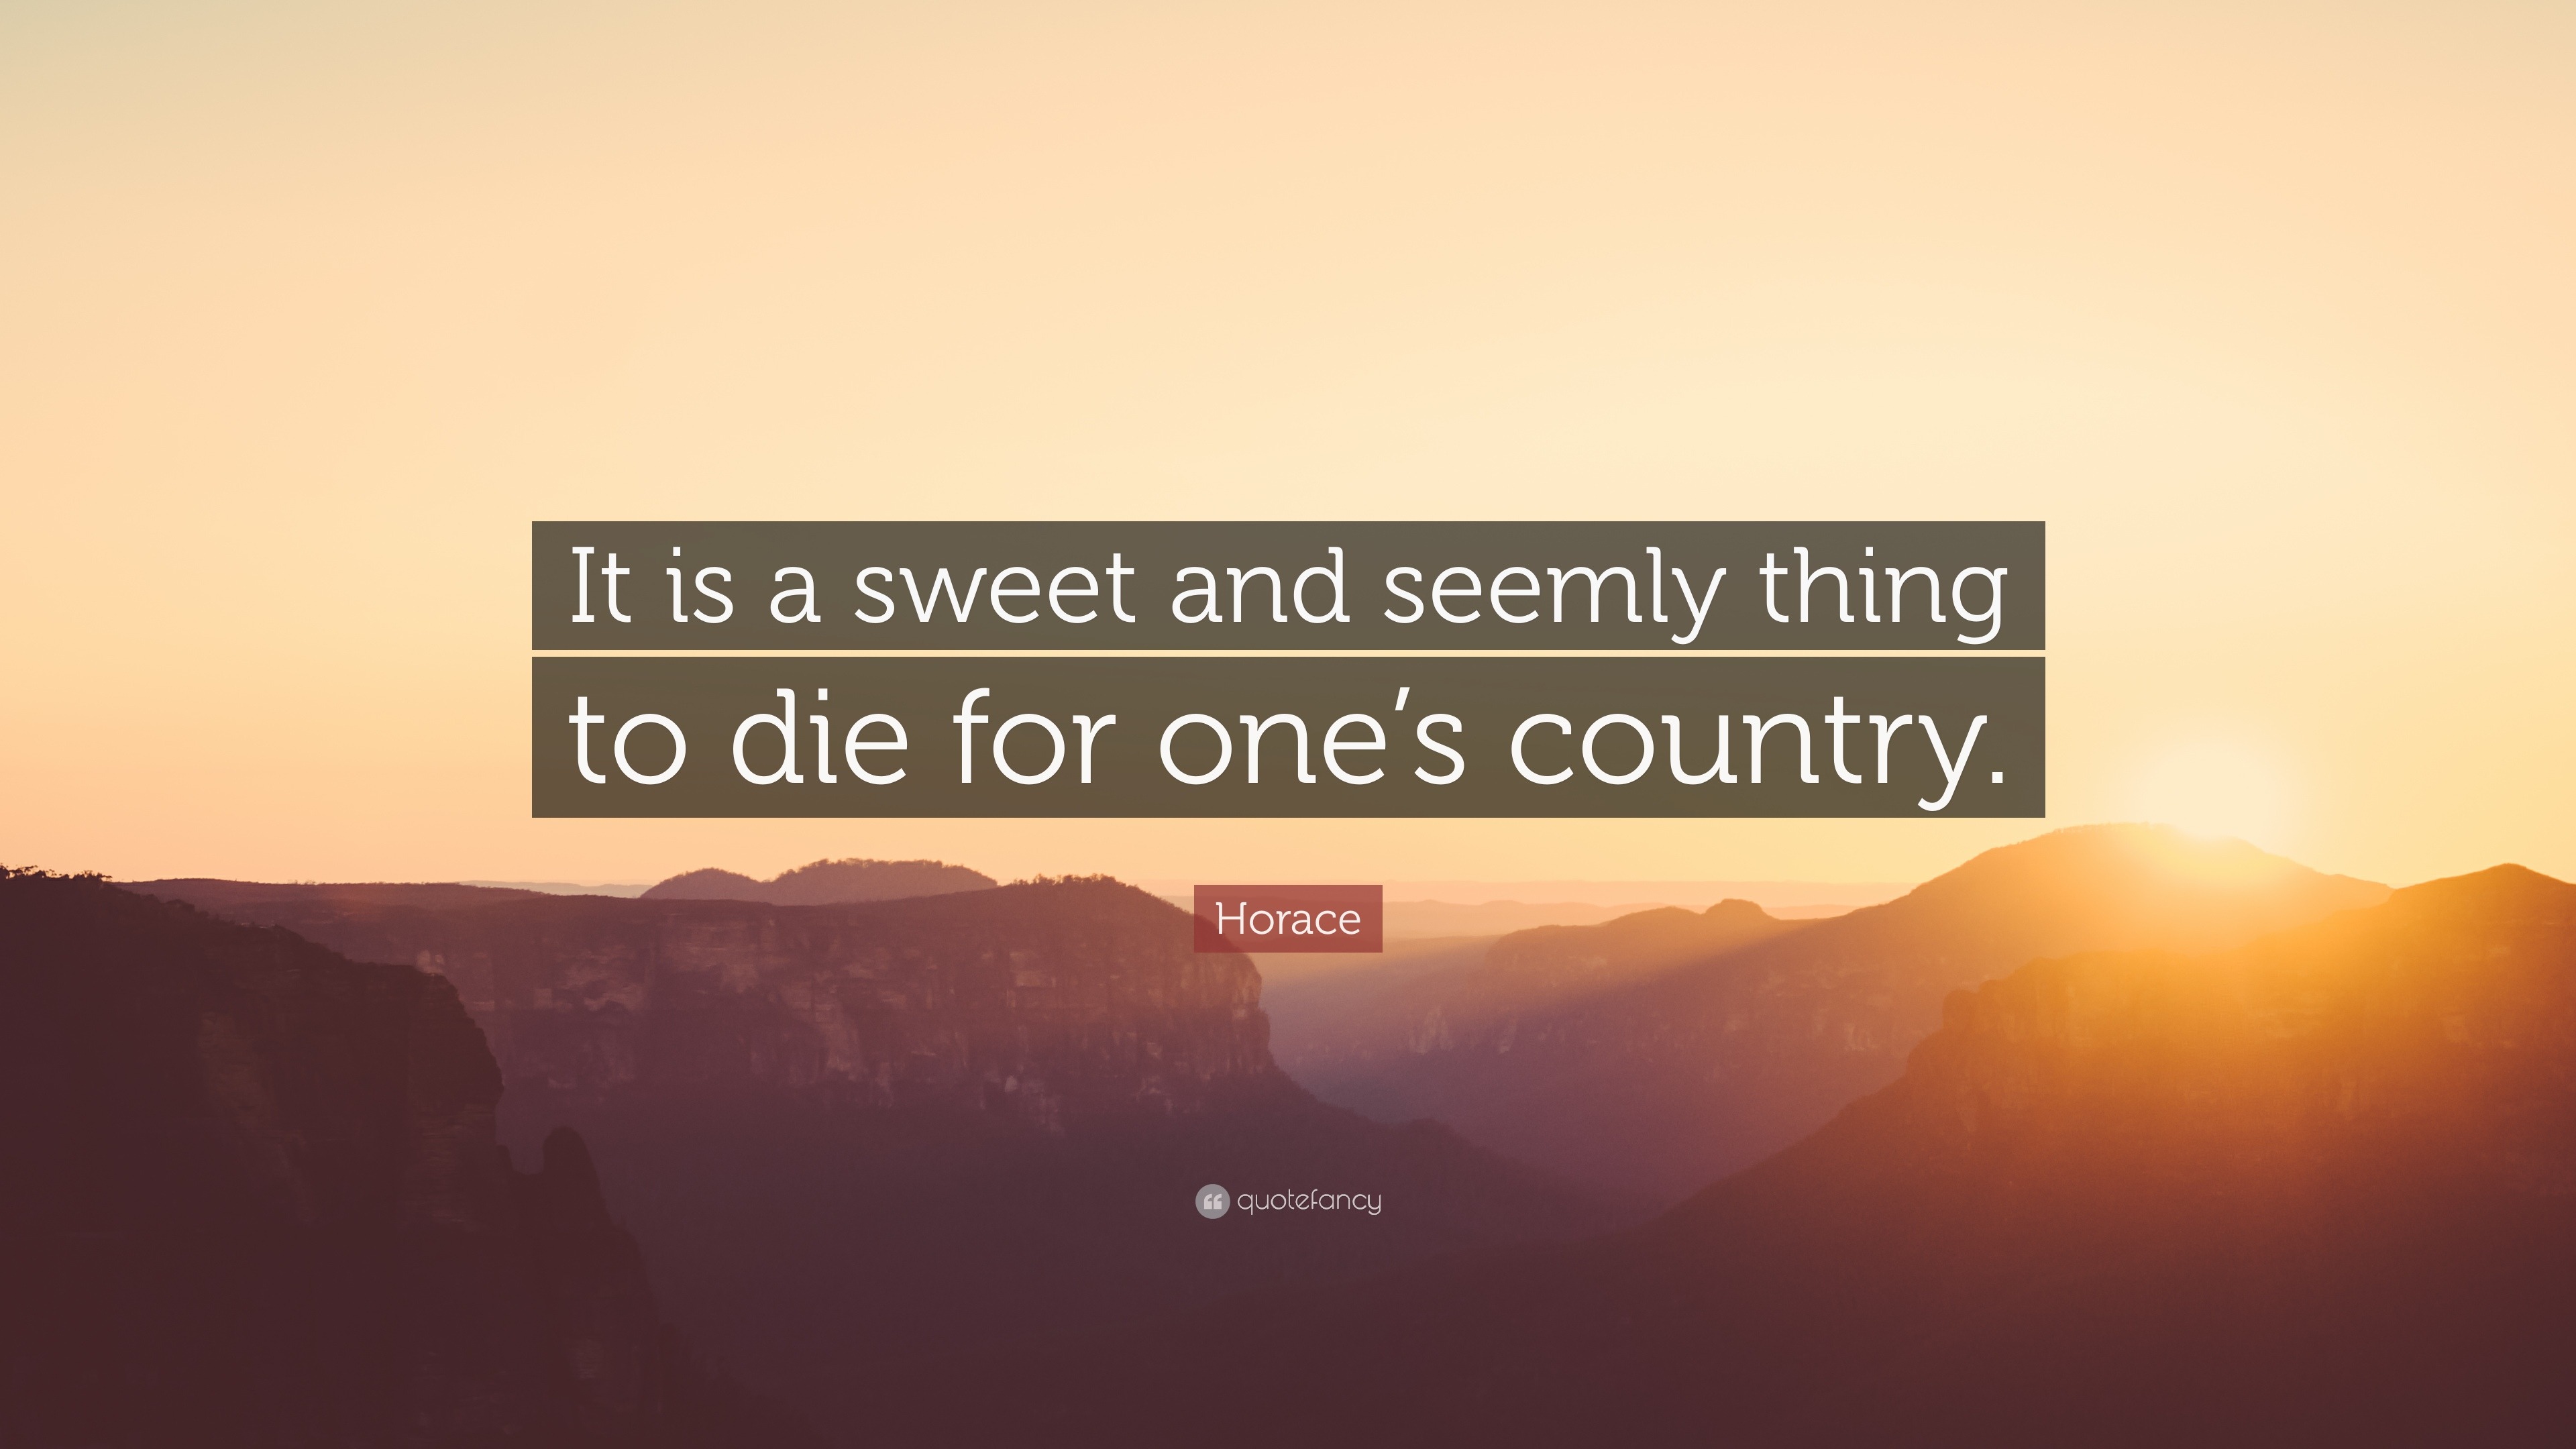 Horace Quote: “It is a sweet and seemly thing to die for one’s country.”